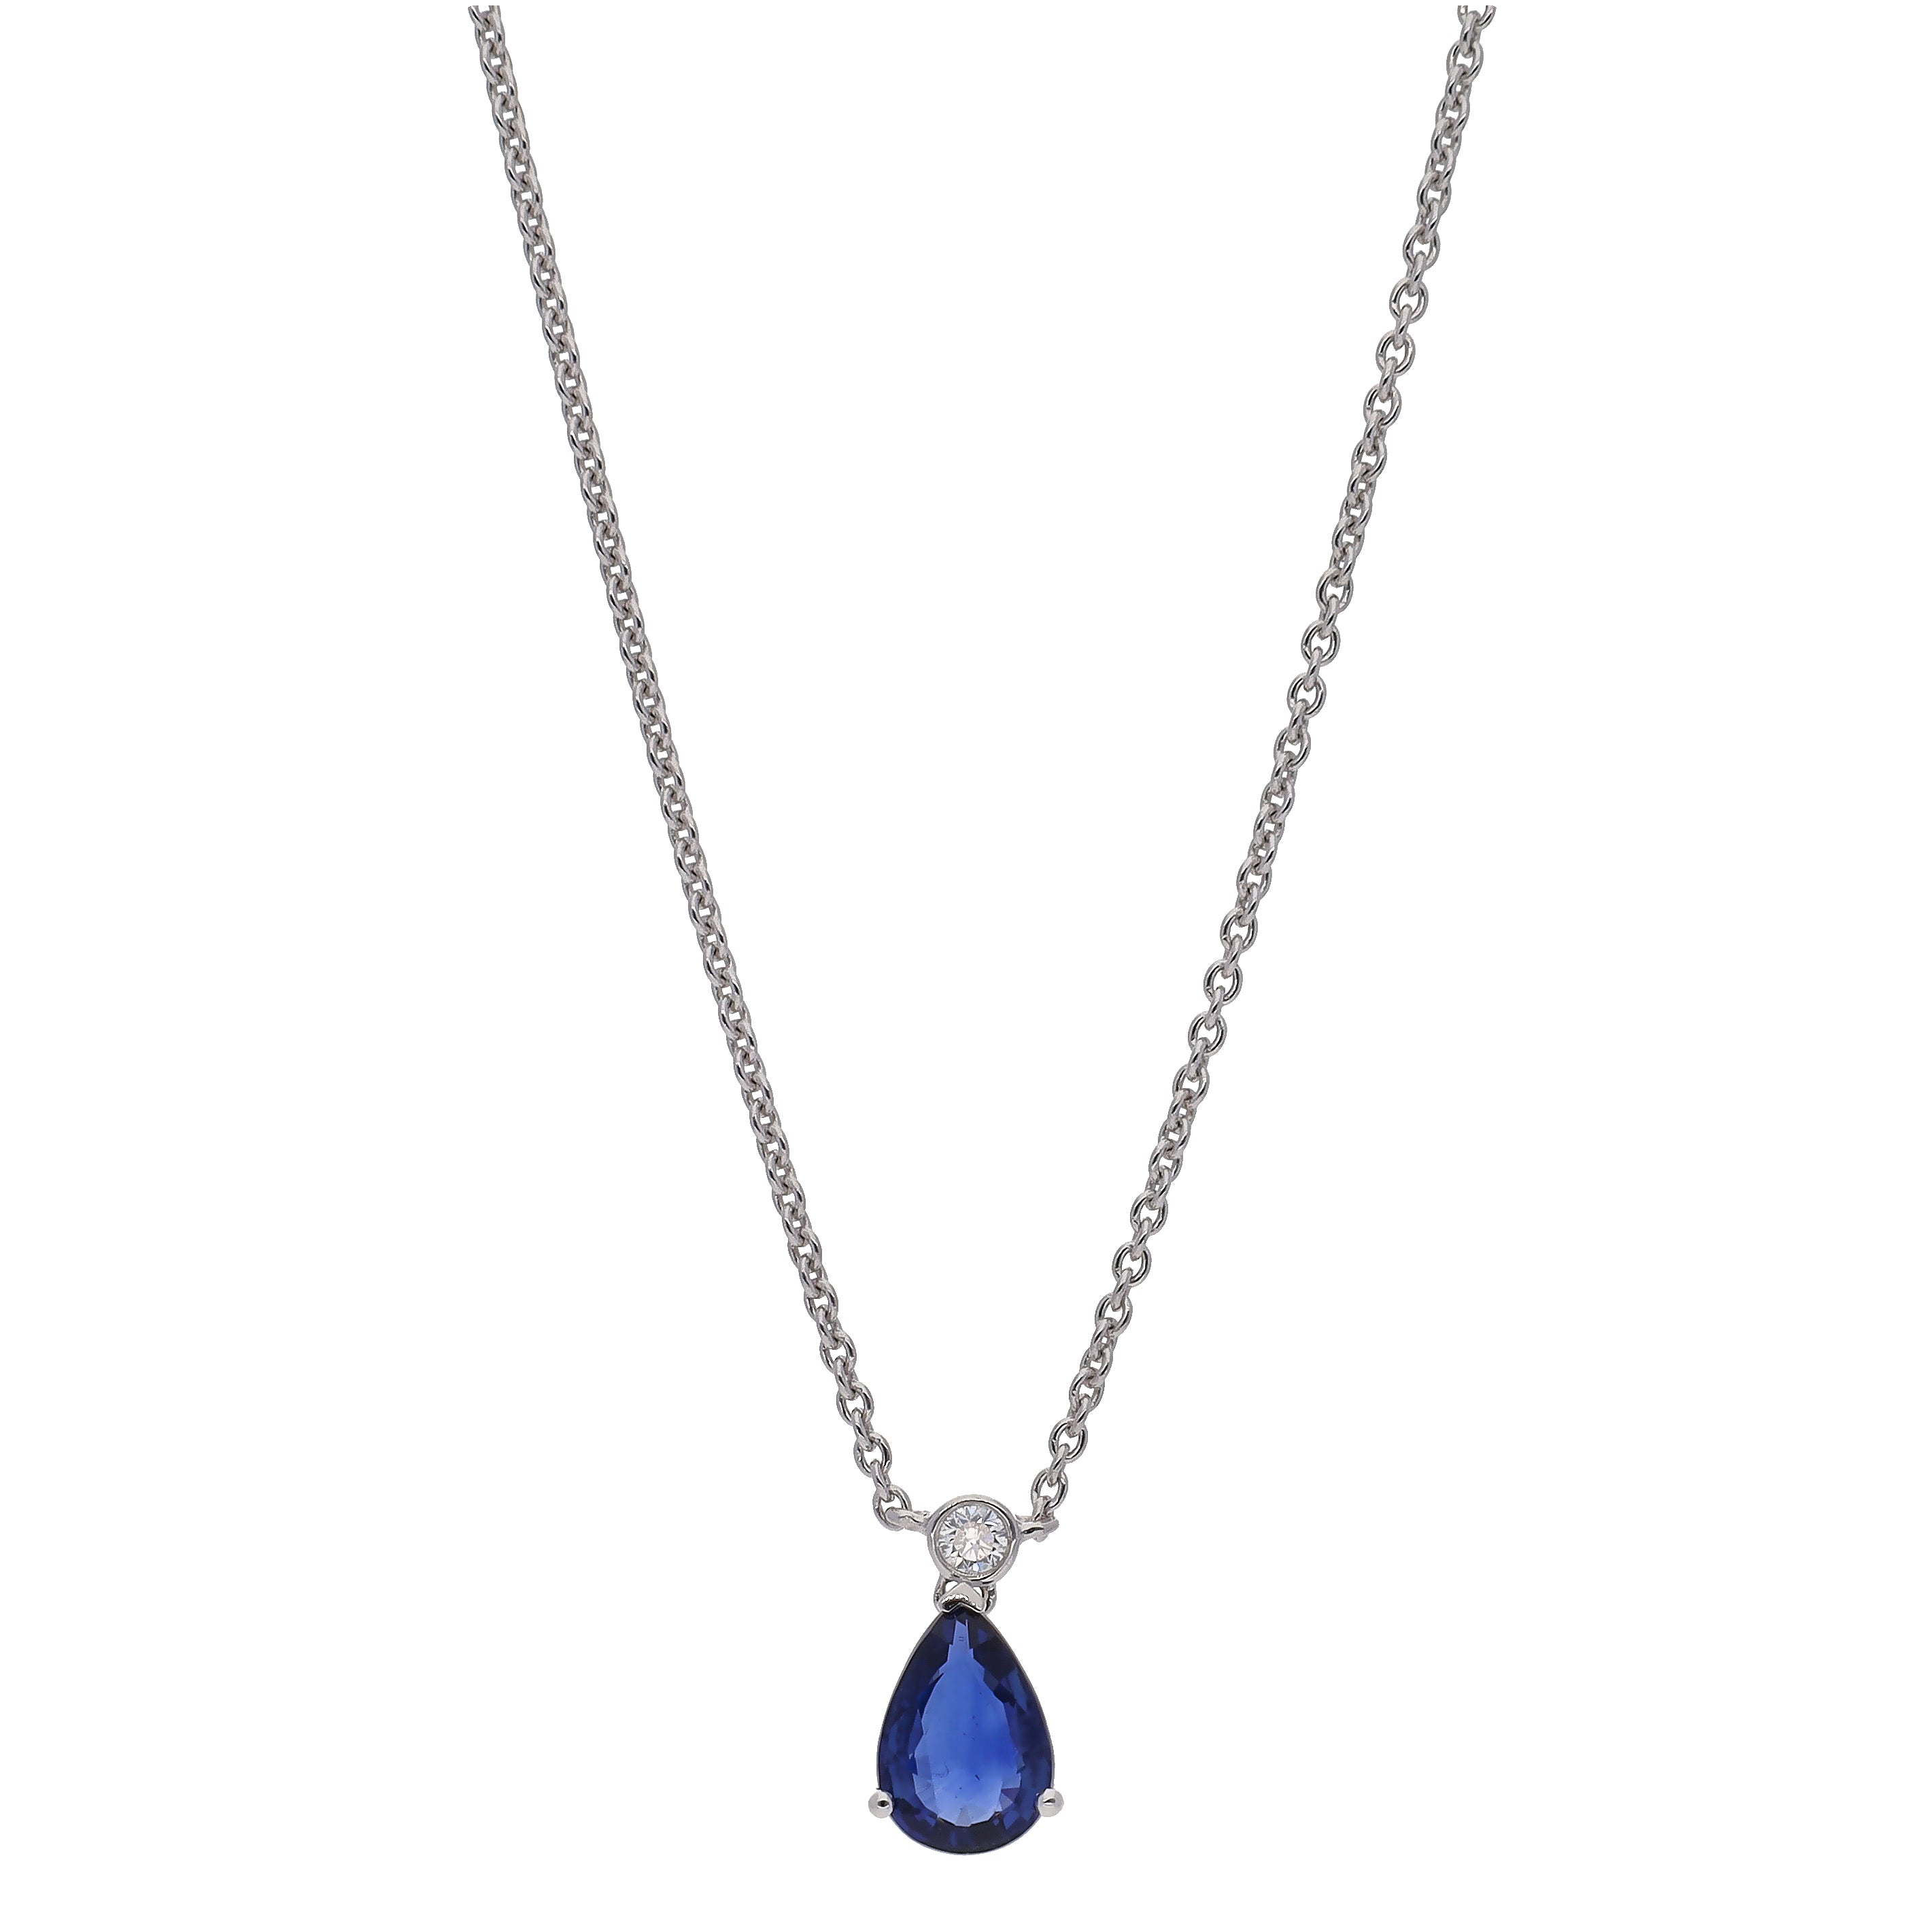 18K White Gold Pear Shaped Sapphire and Diamond Pendant 16" Necklace